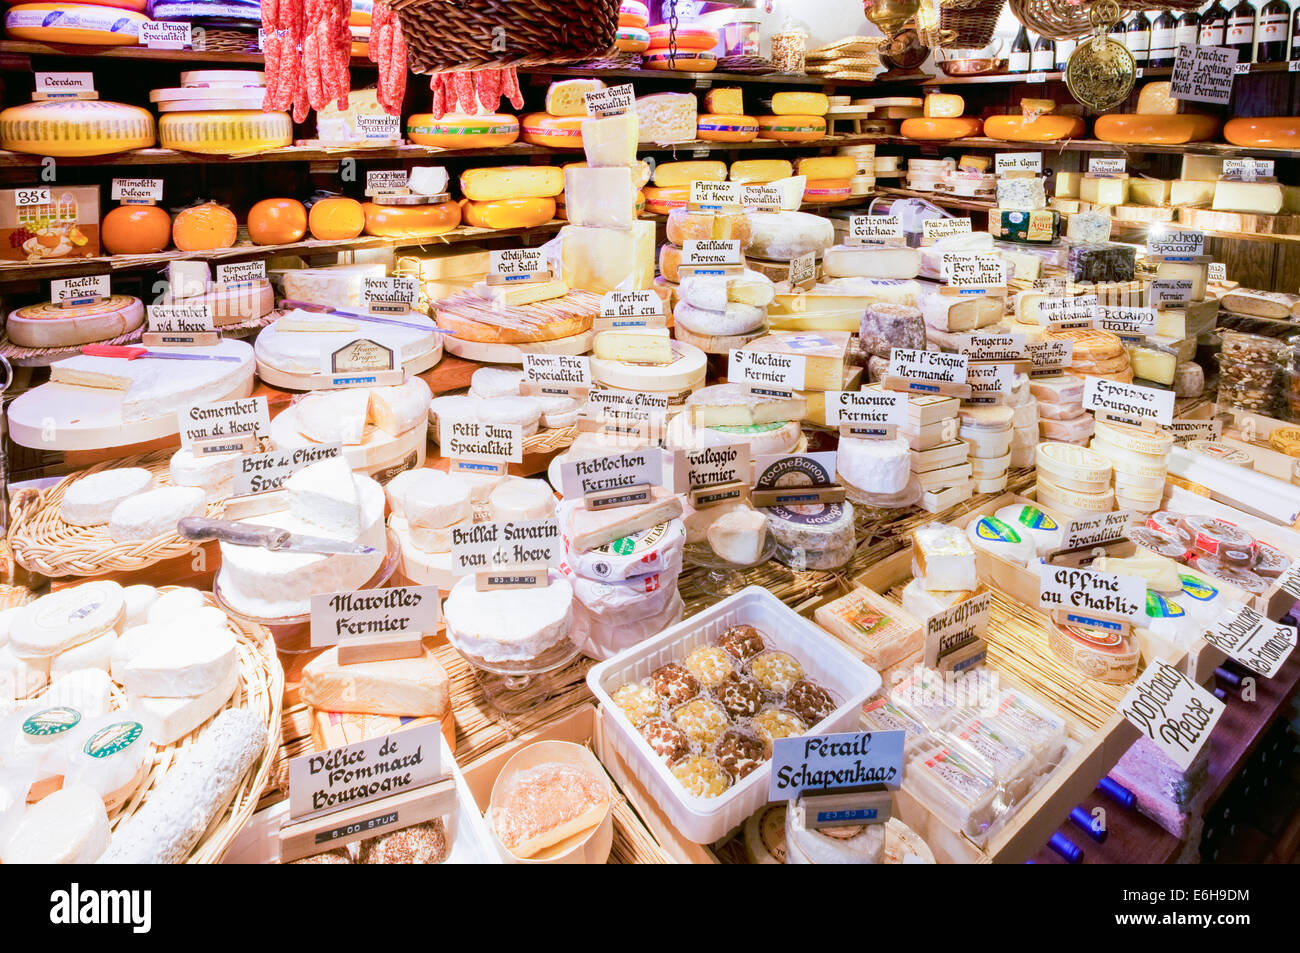 The interior of the famous delicatessen, Diksmuids Boterhuis showing a variety of cheese and dried sausage in Bruges, Belgium Stock Photo